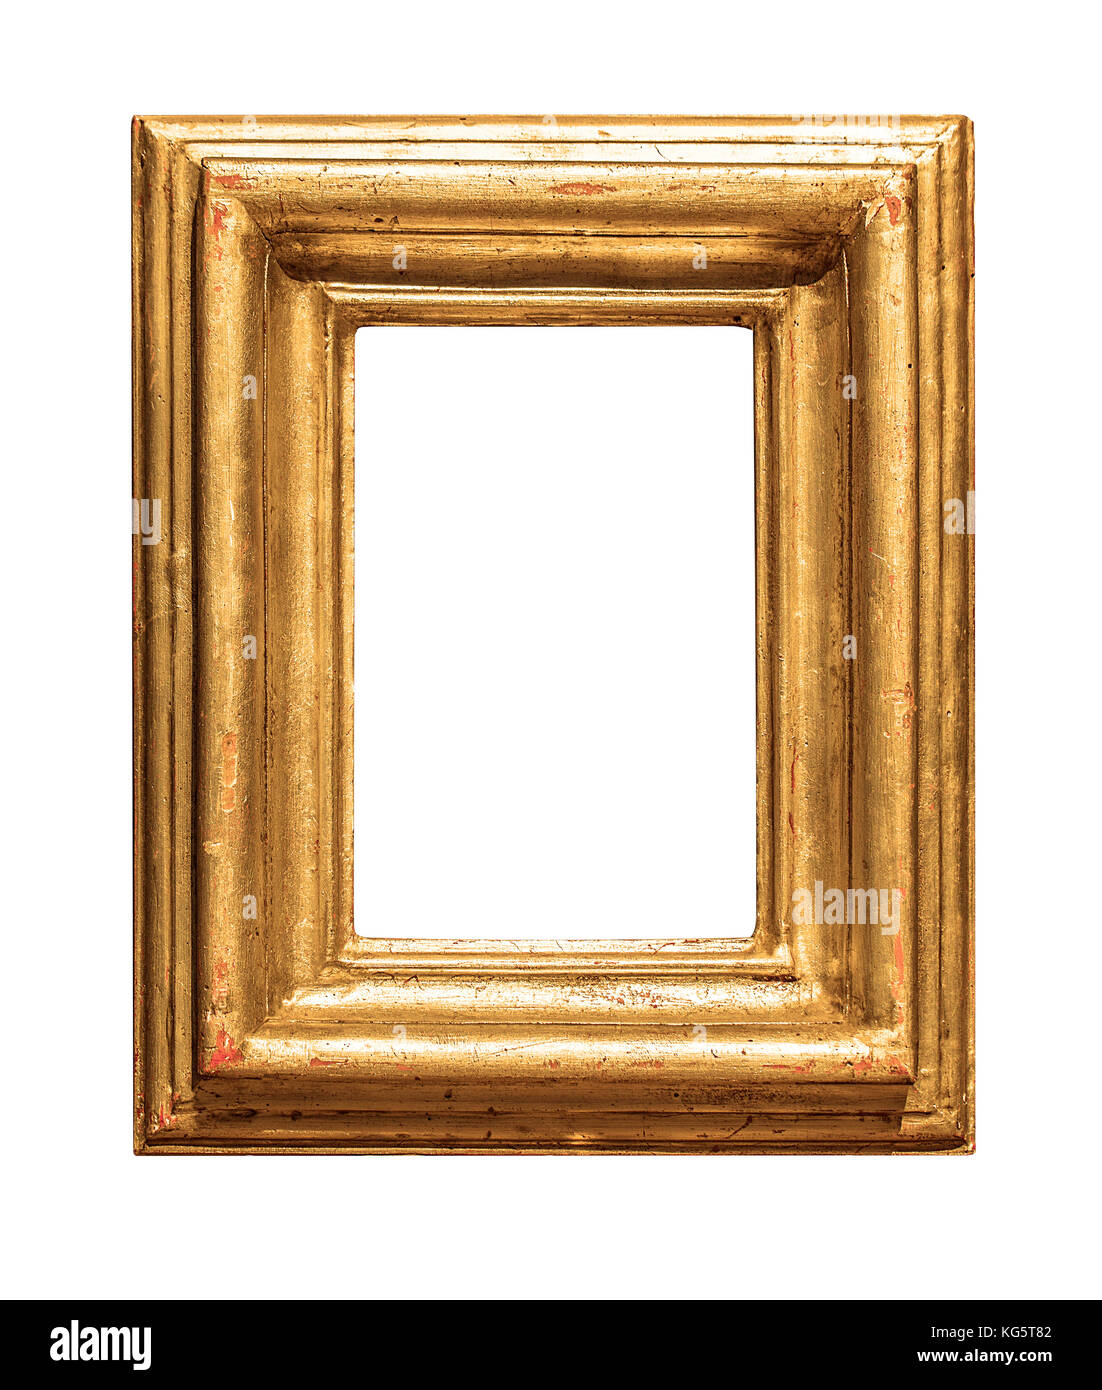 old wooden frame isolated on white background with clipping path Stock Photo